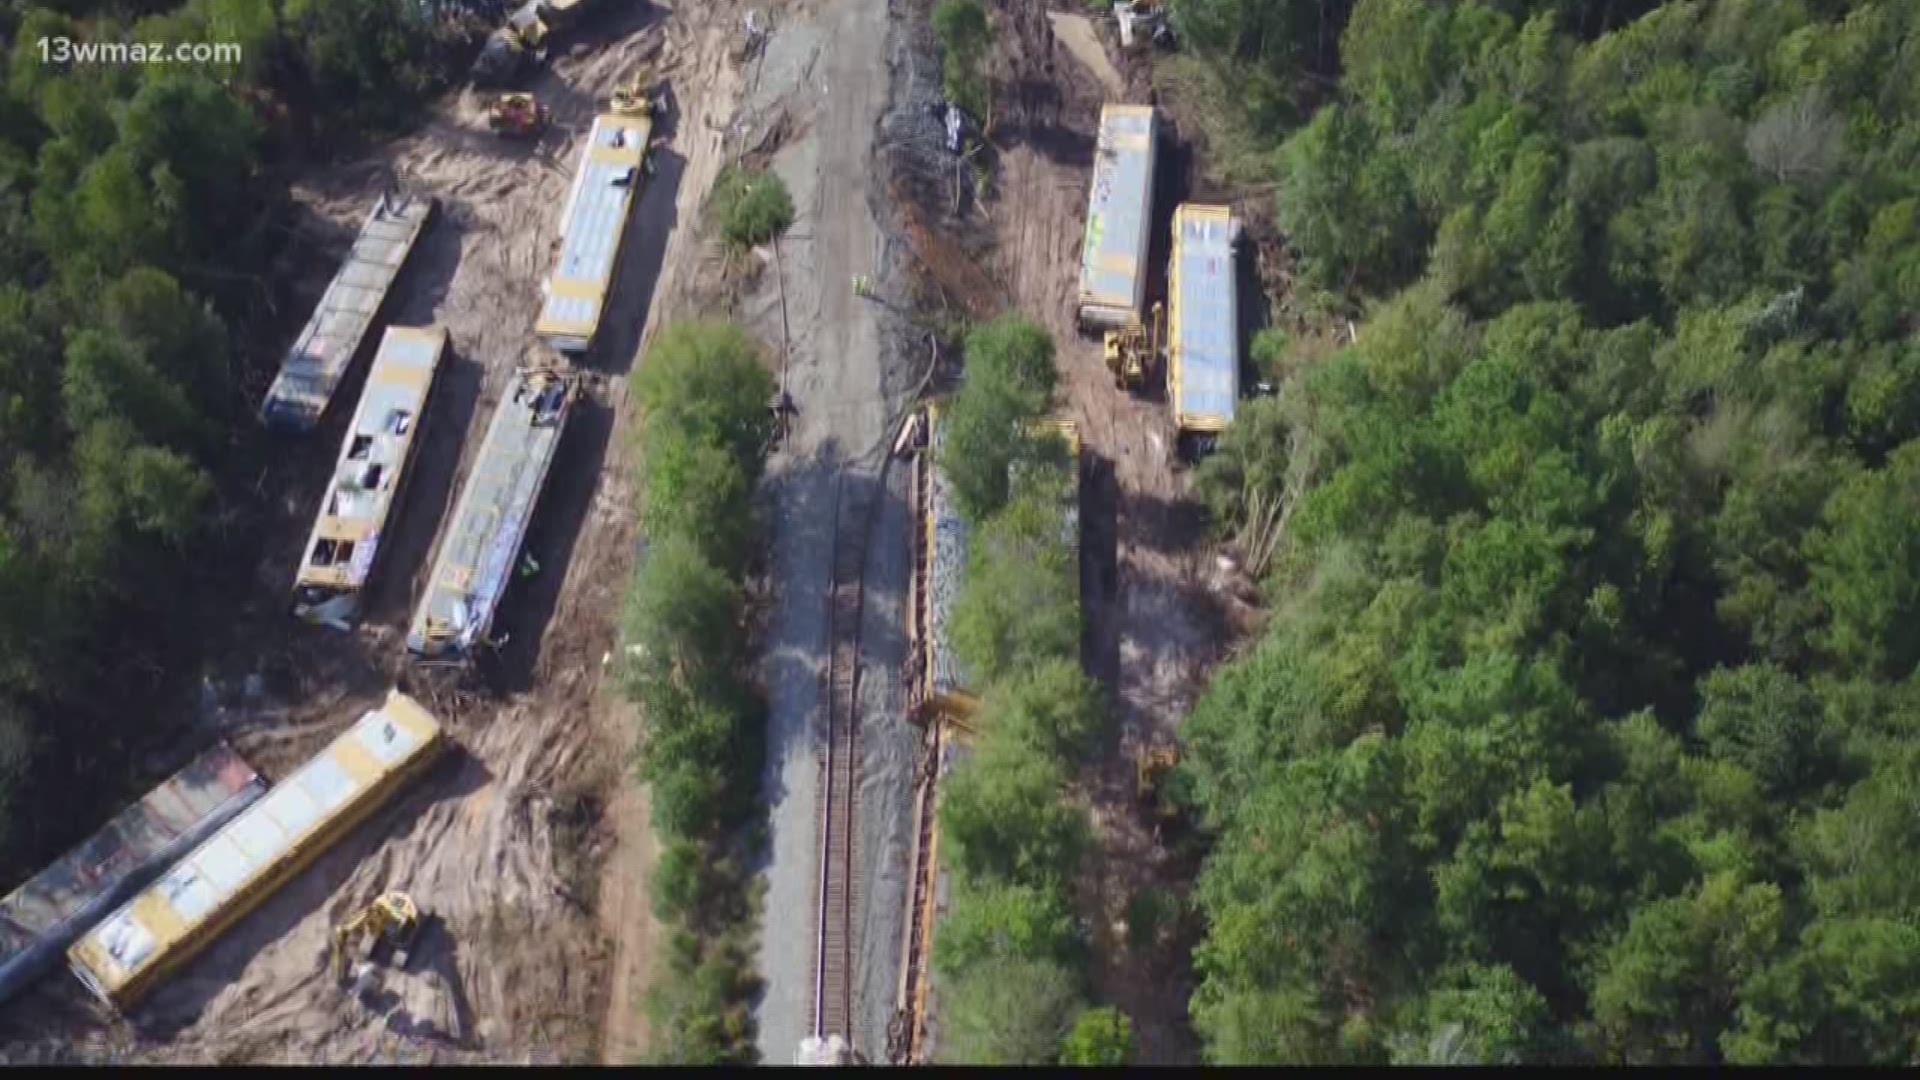 An October train wreck near Perry was one of the most expensive in state history, but one fire chief was more concerned about hazardous chemicals on board